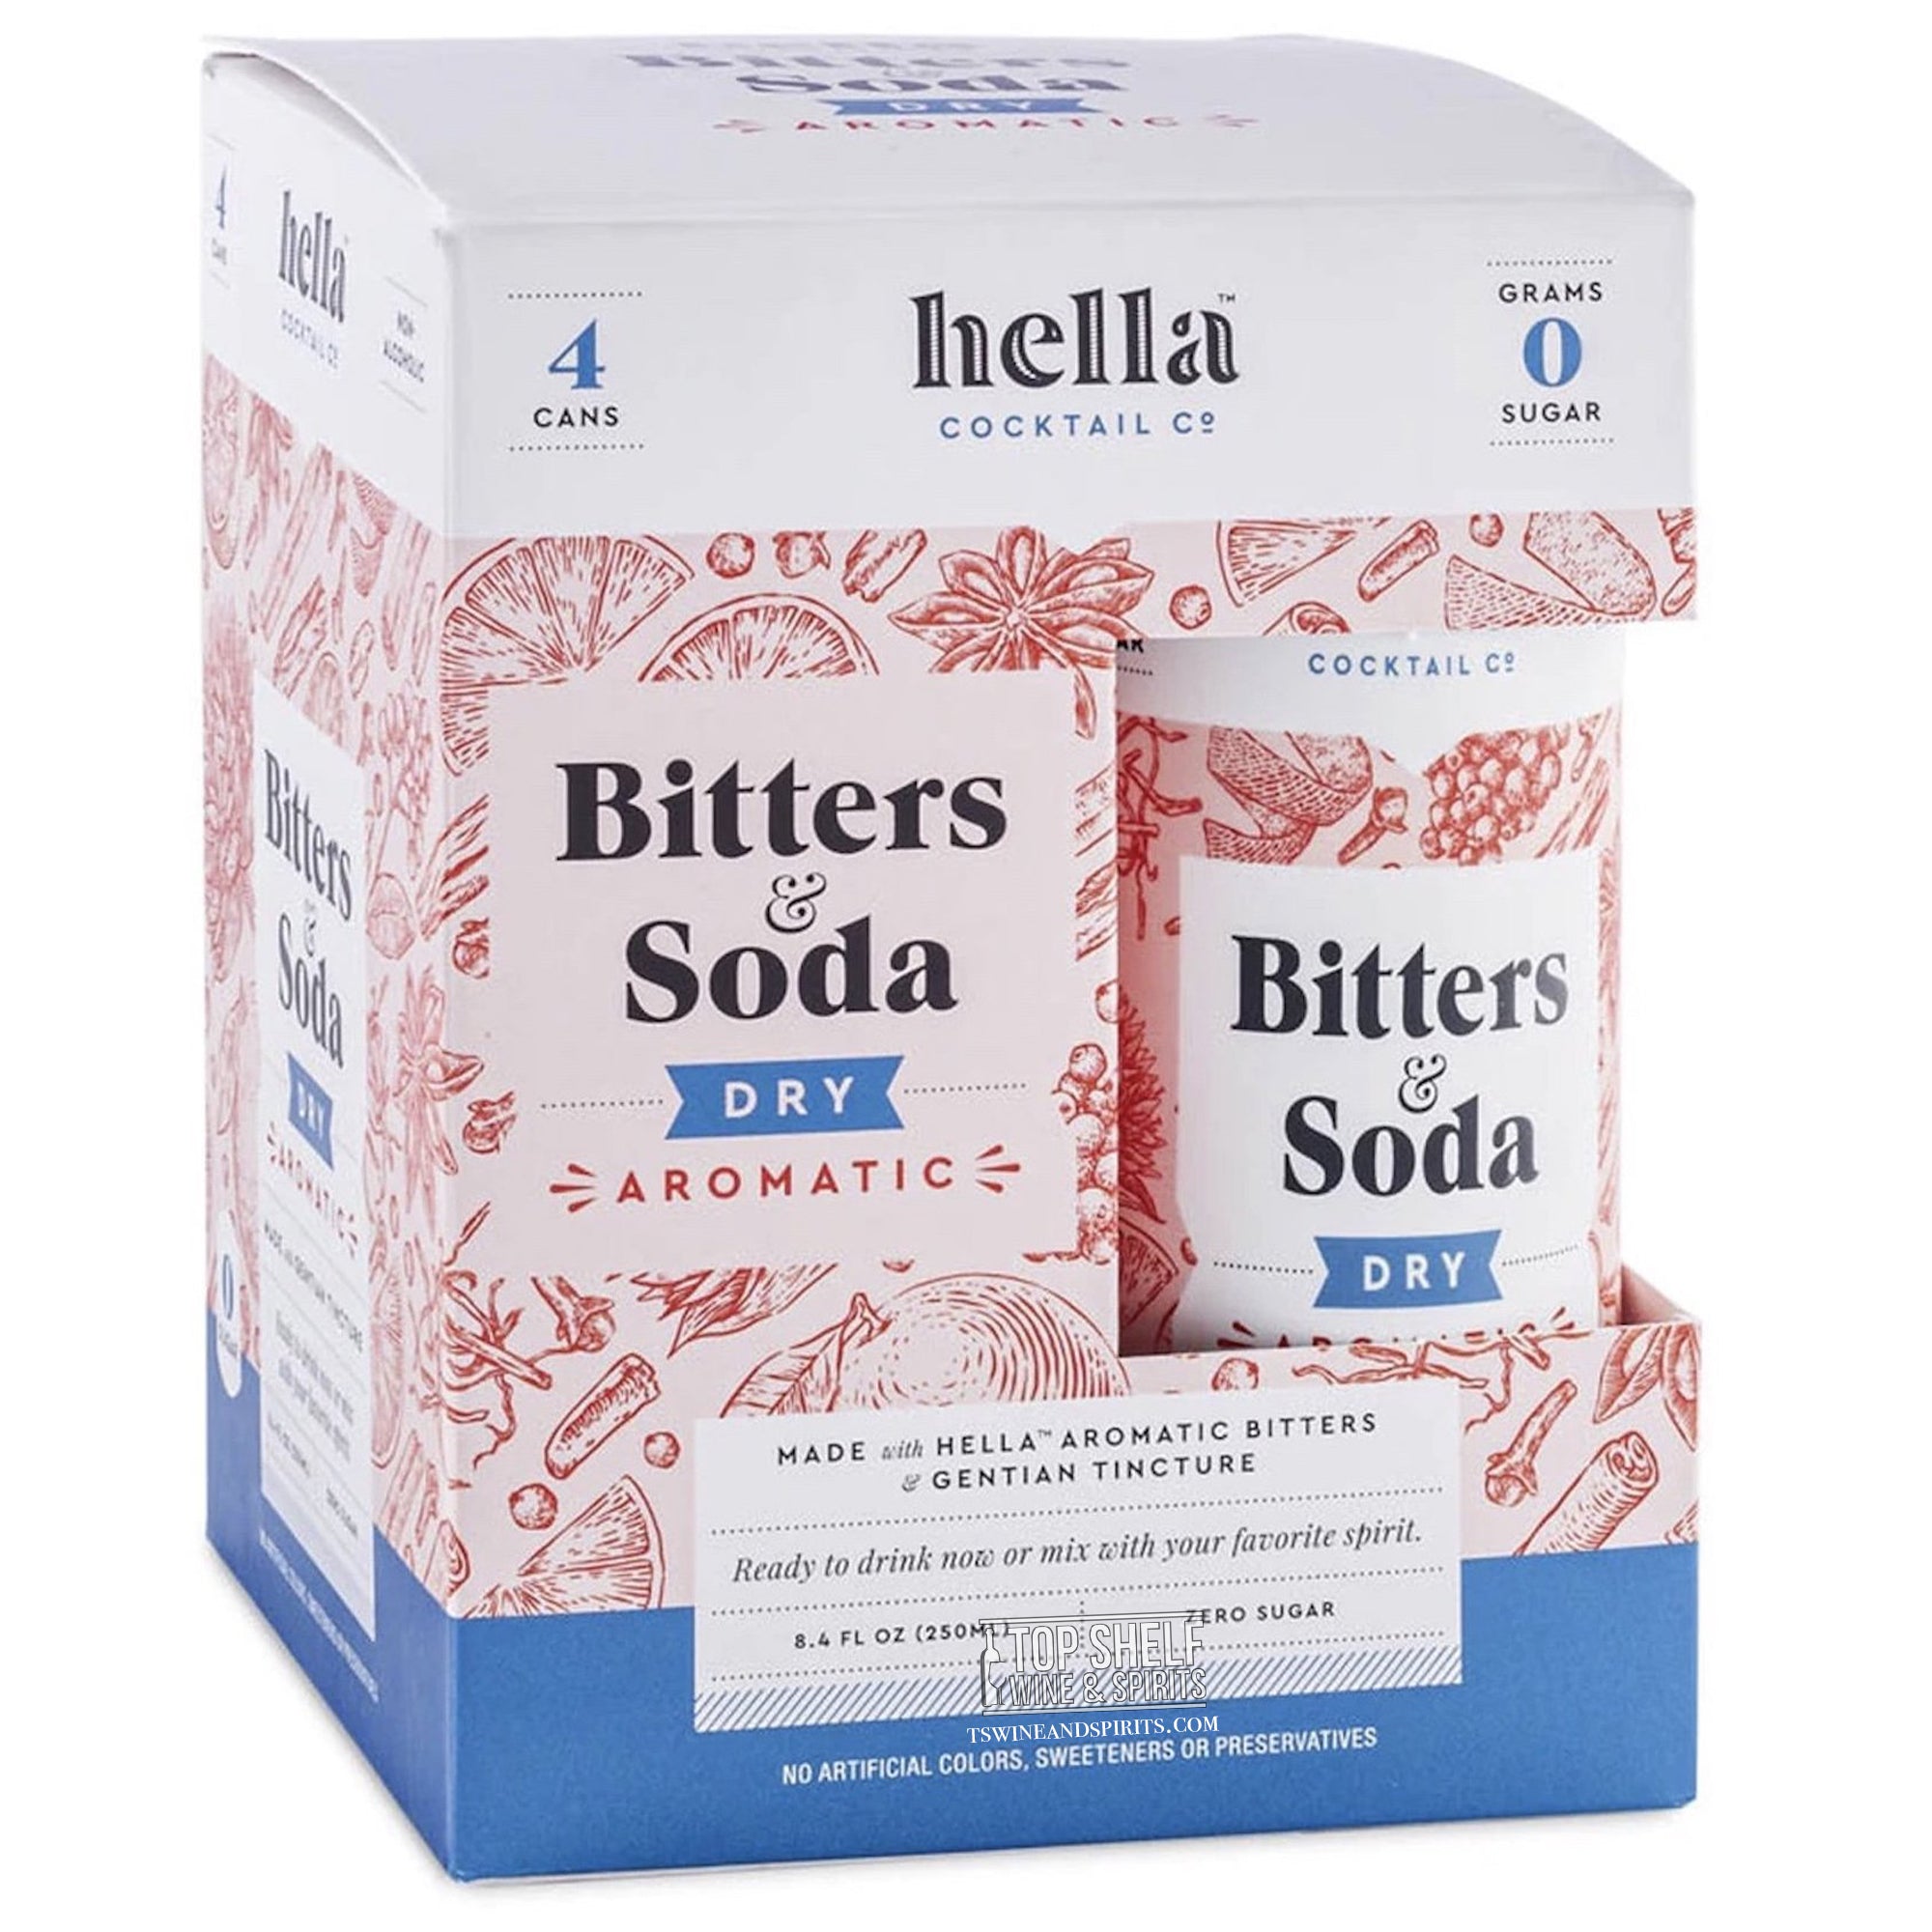 Hella Bitters & Soda Dry Aromatic 4 pack Cans